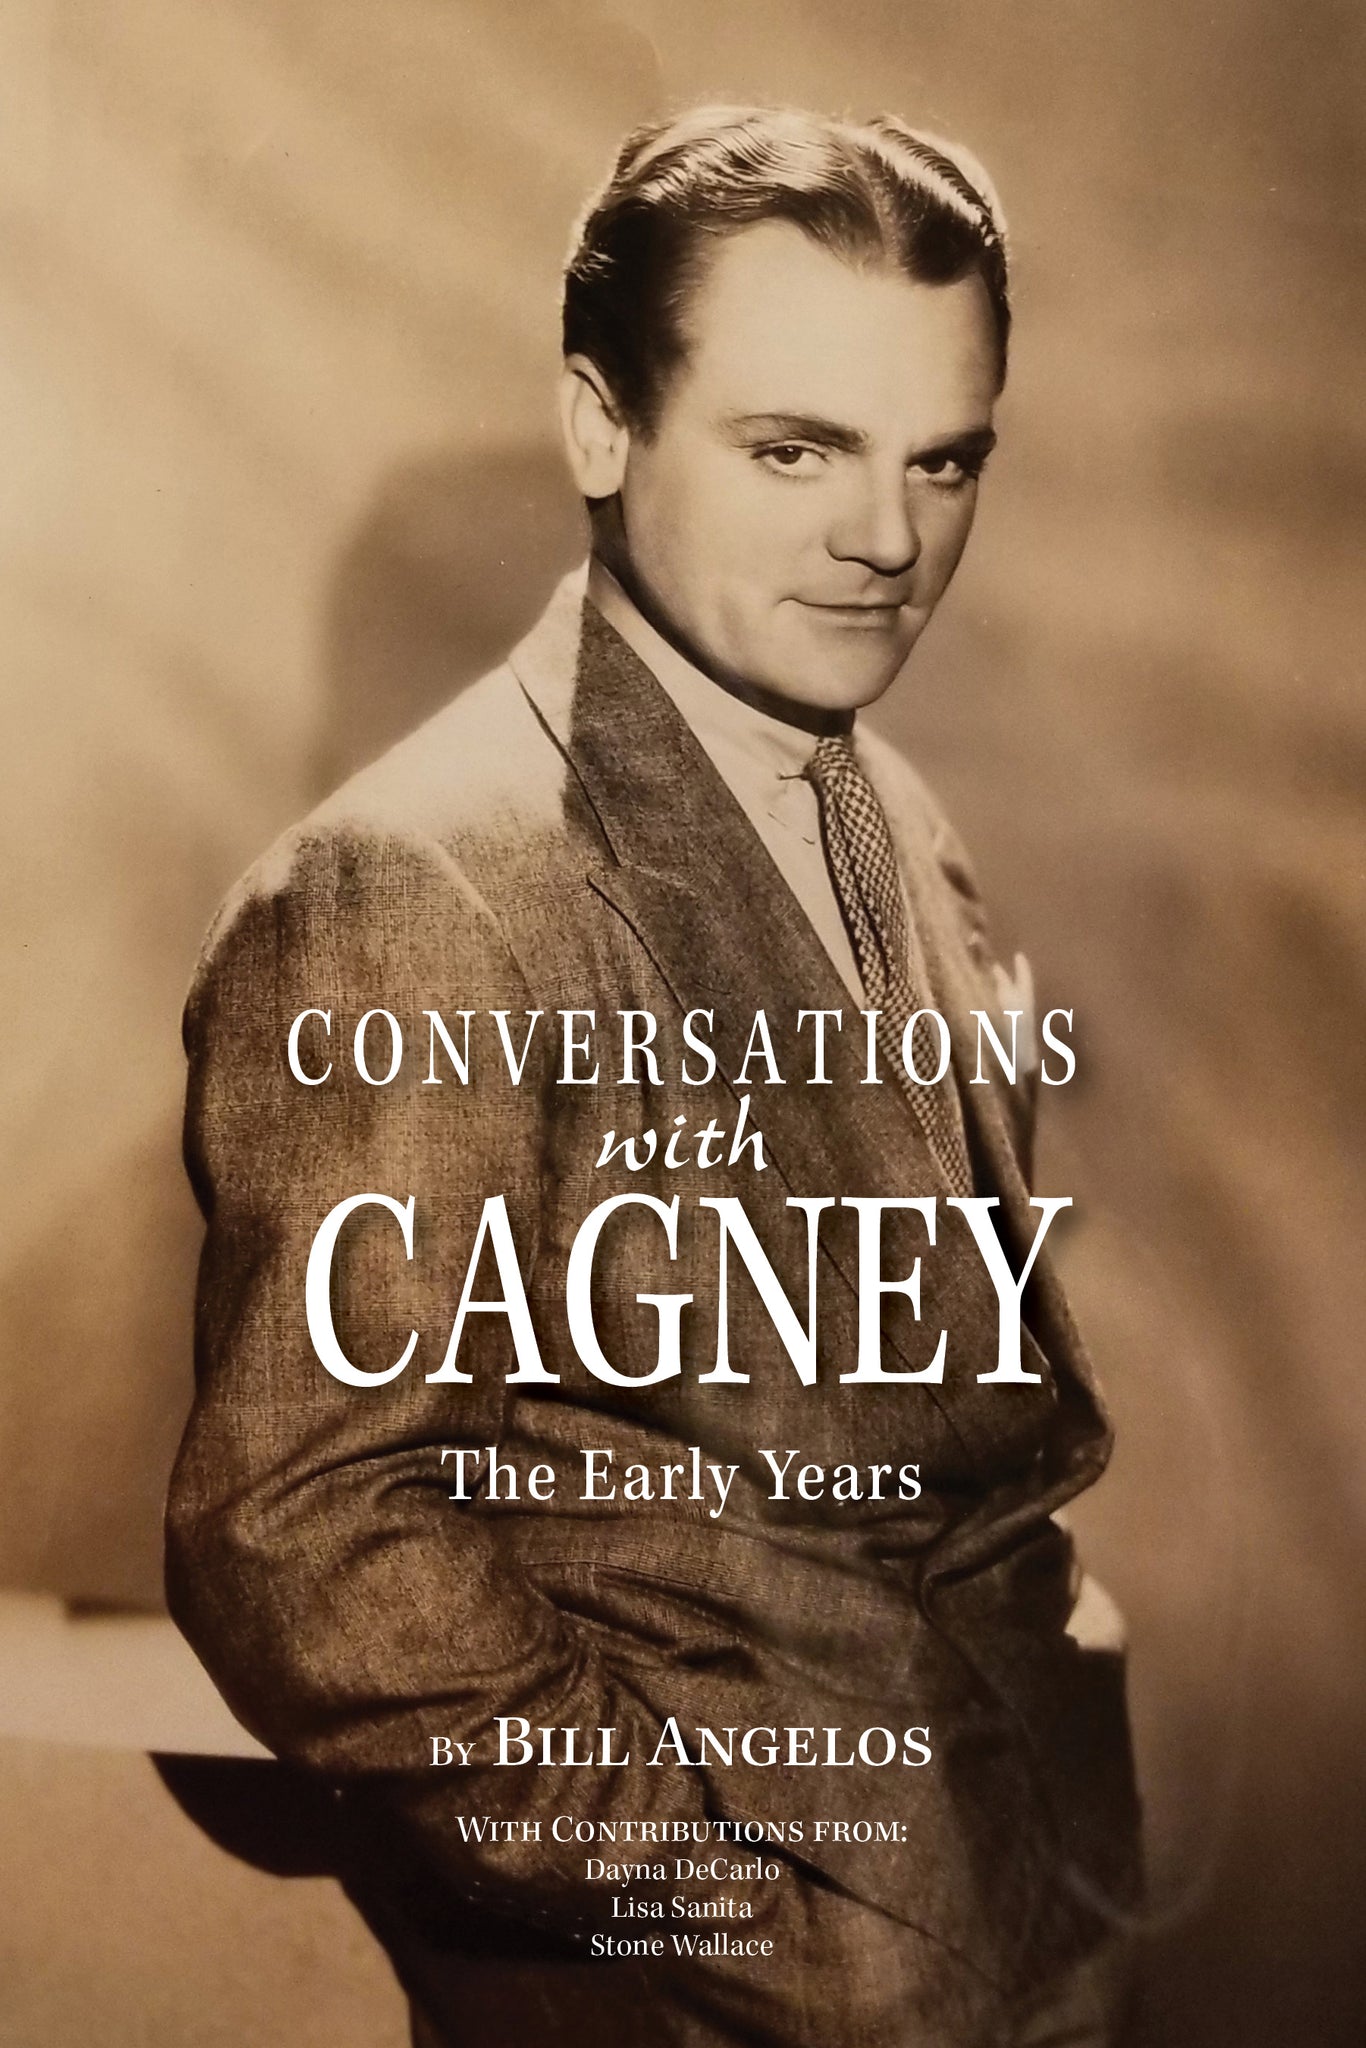 CONVERSATIONS WITH CAGNEY: THE EARLY YEARS (hardback)